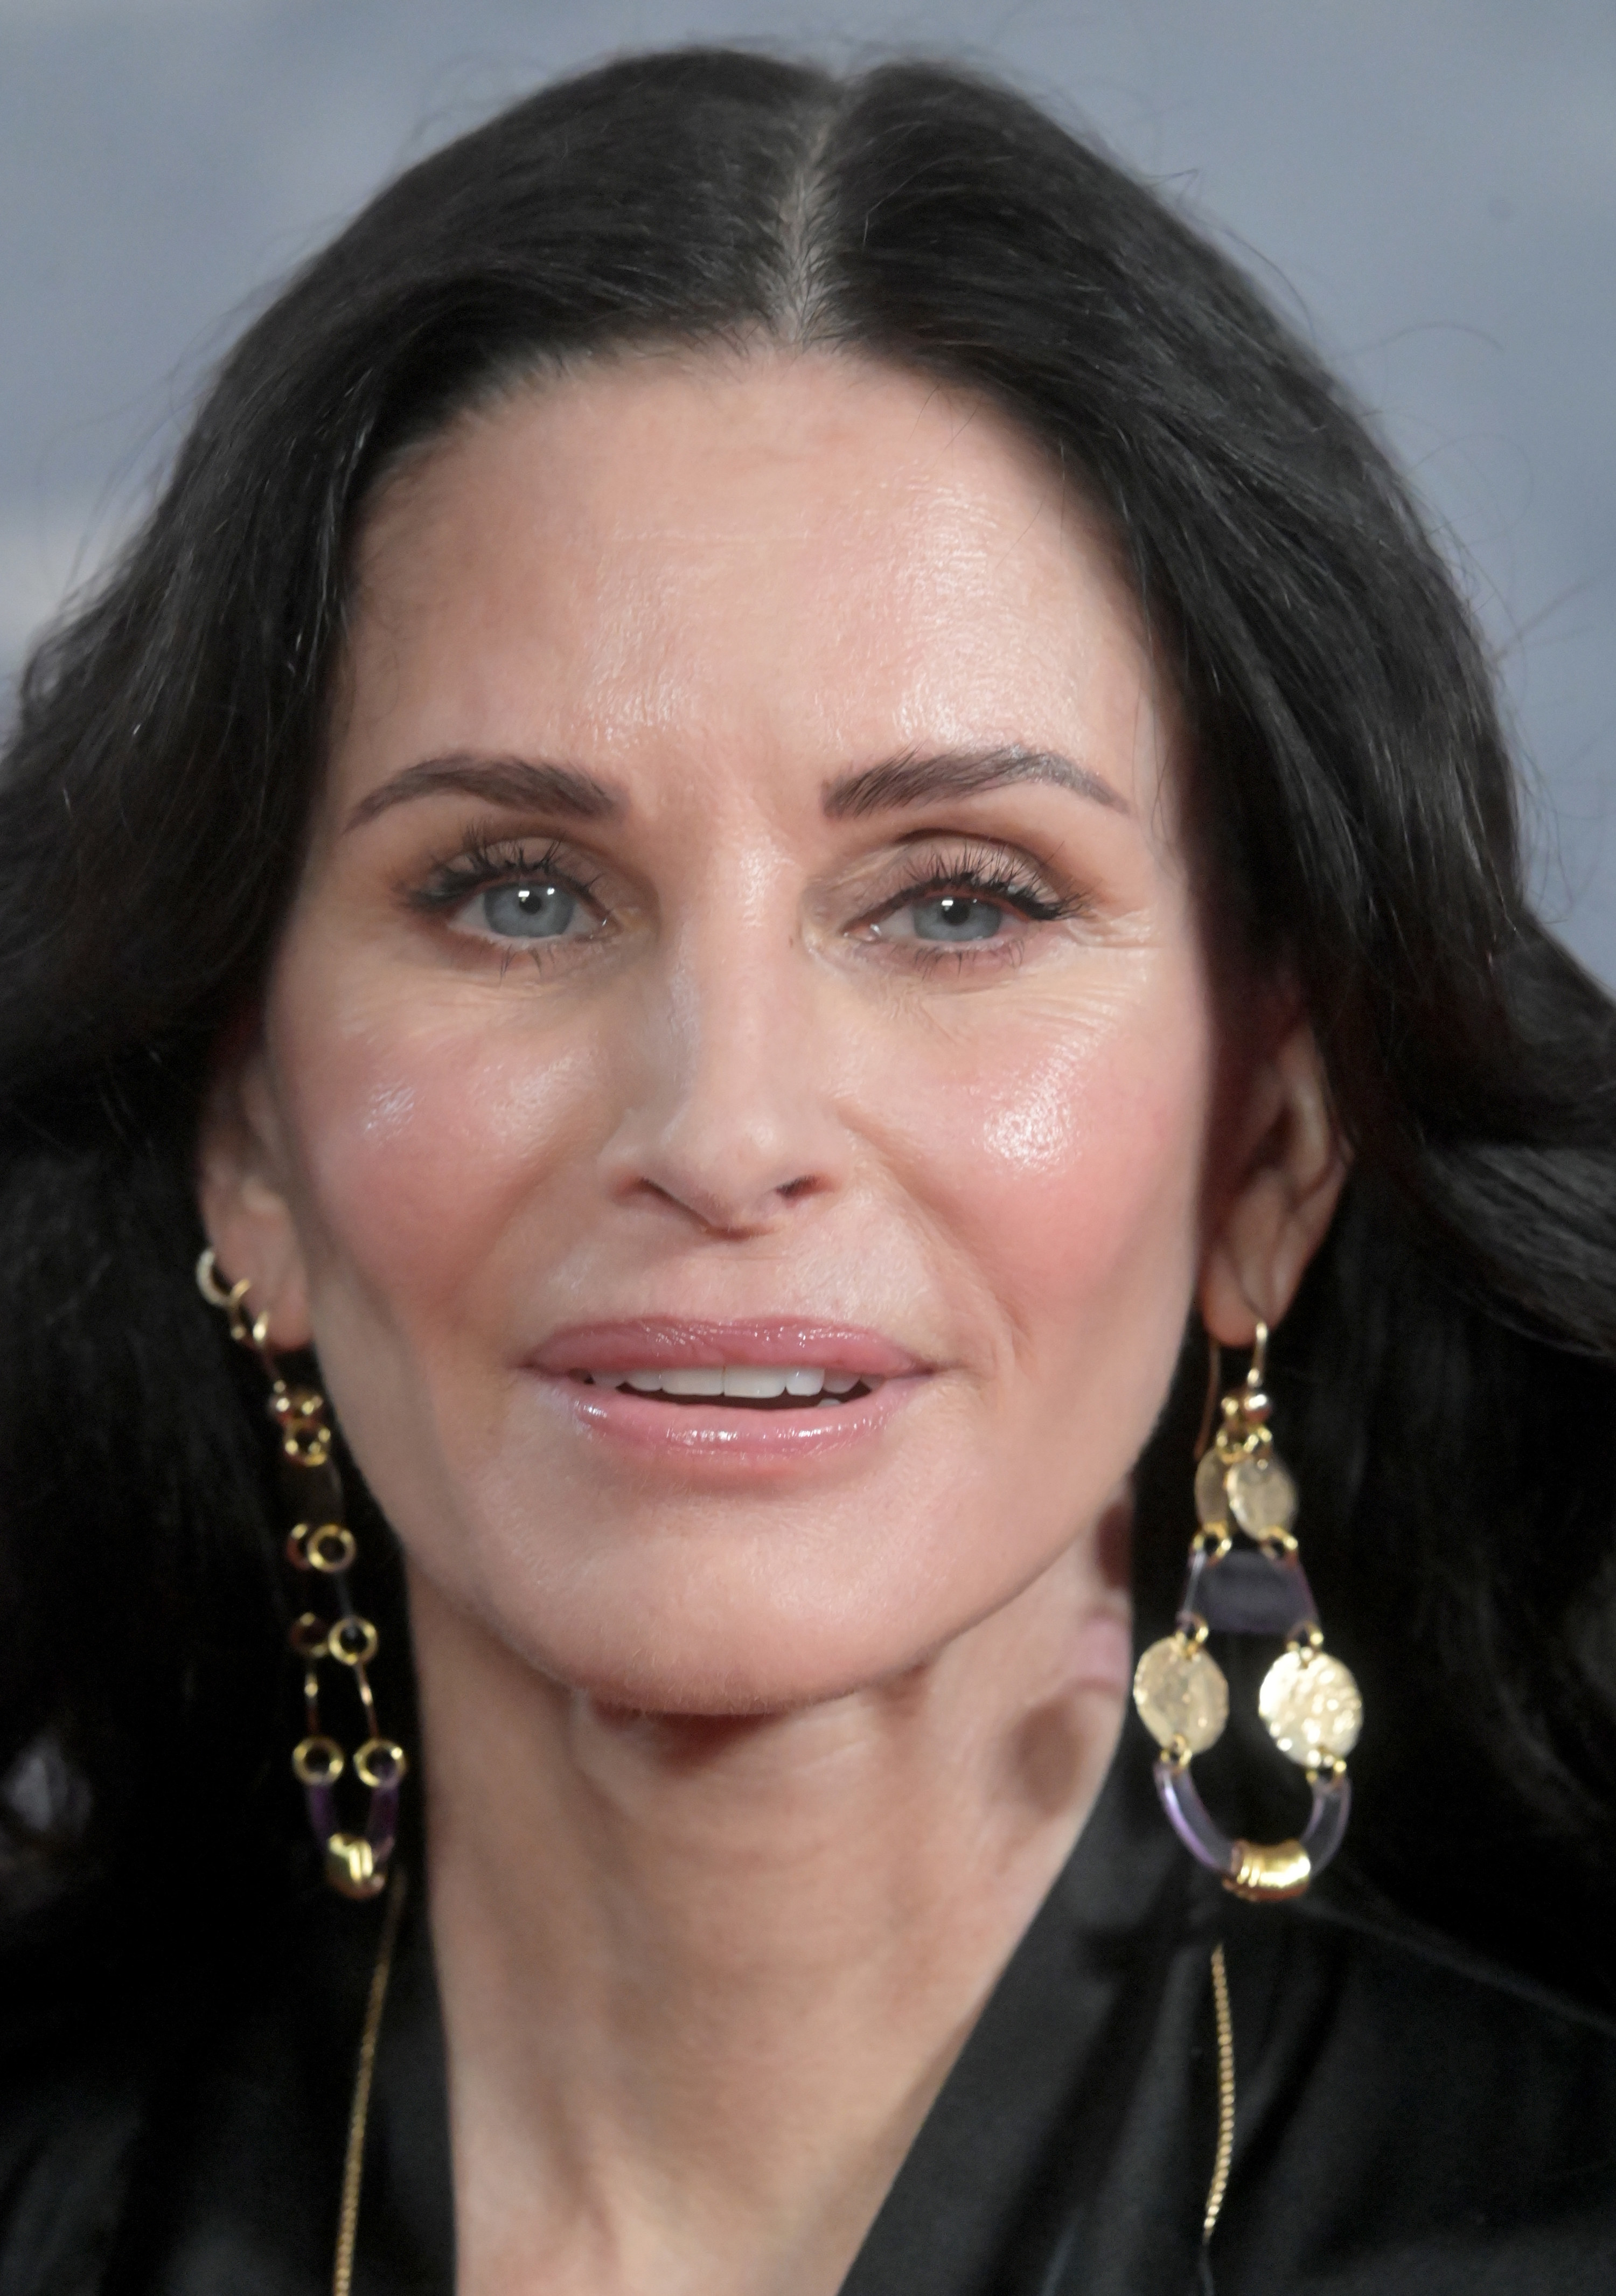 A close-up of Courteney